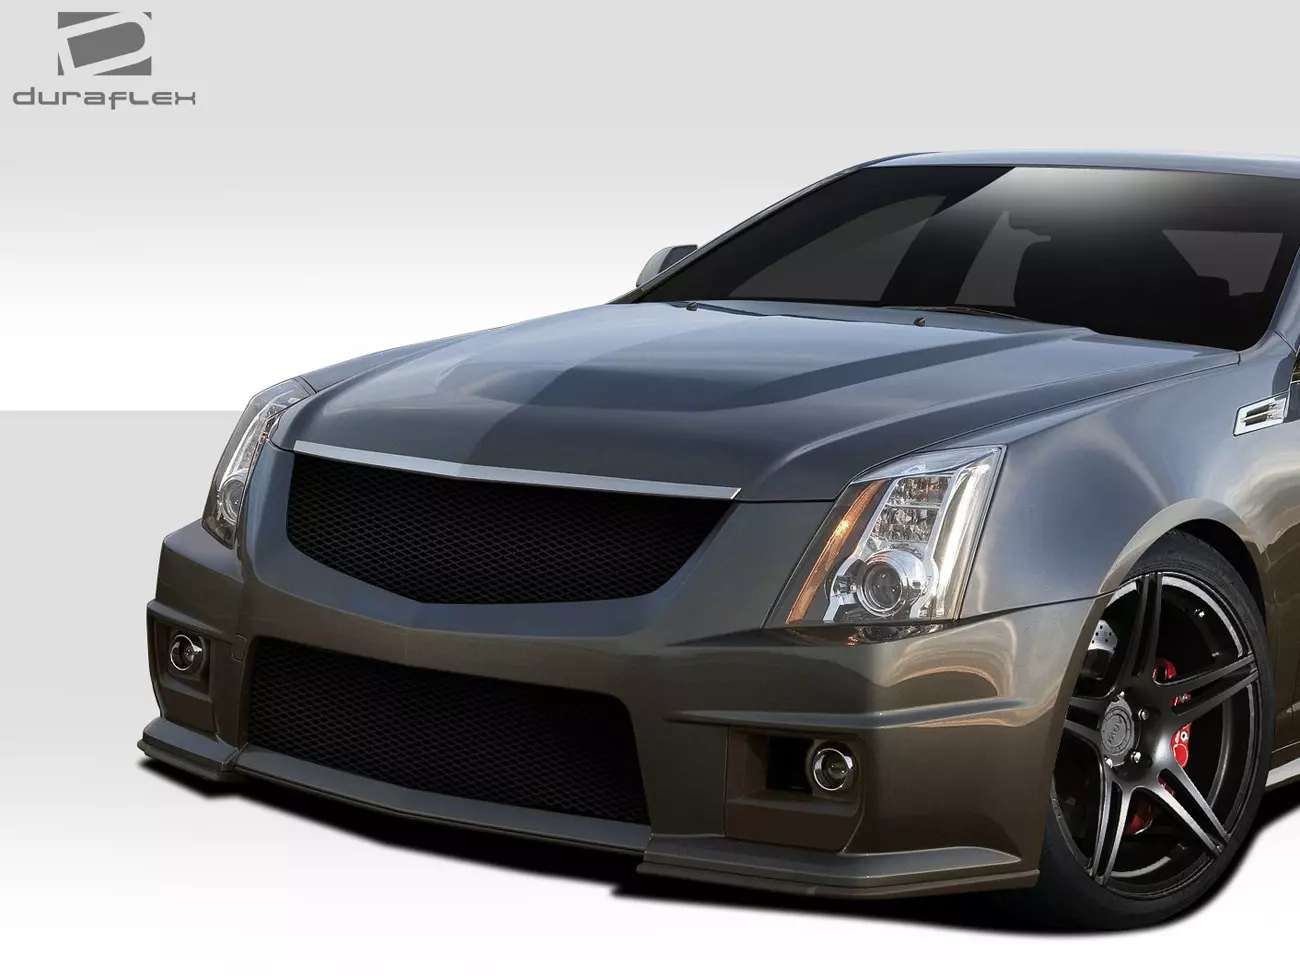 2008-2013 Cadillac CTS Duraflex CTS-V Look Front Bumper Cover 1 Piece - Image 2